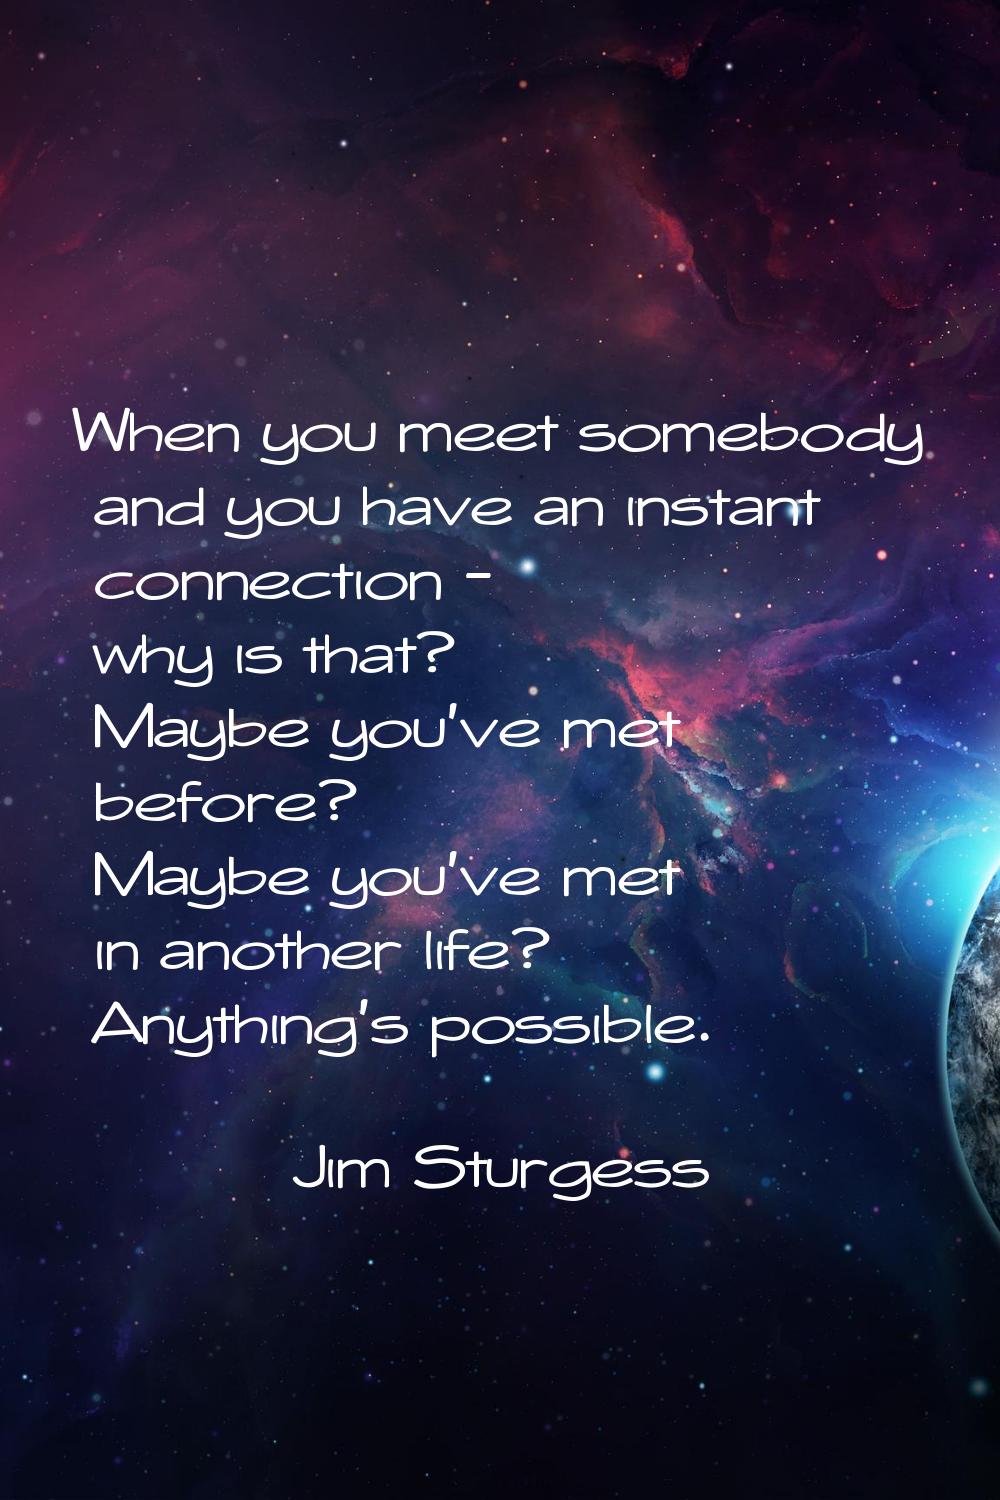 When you meet somebody and you have an instant connection - why is that? Maybe you've met before? M